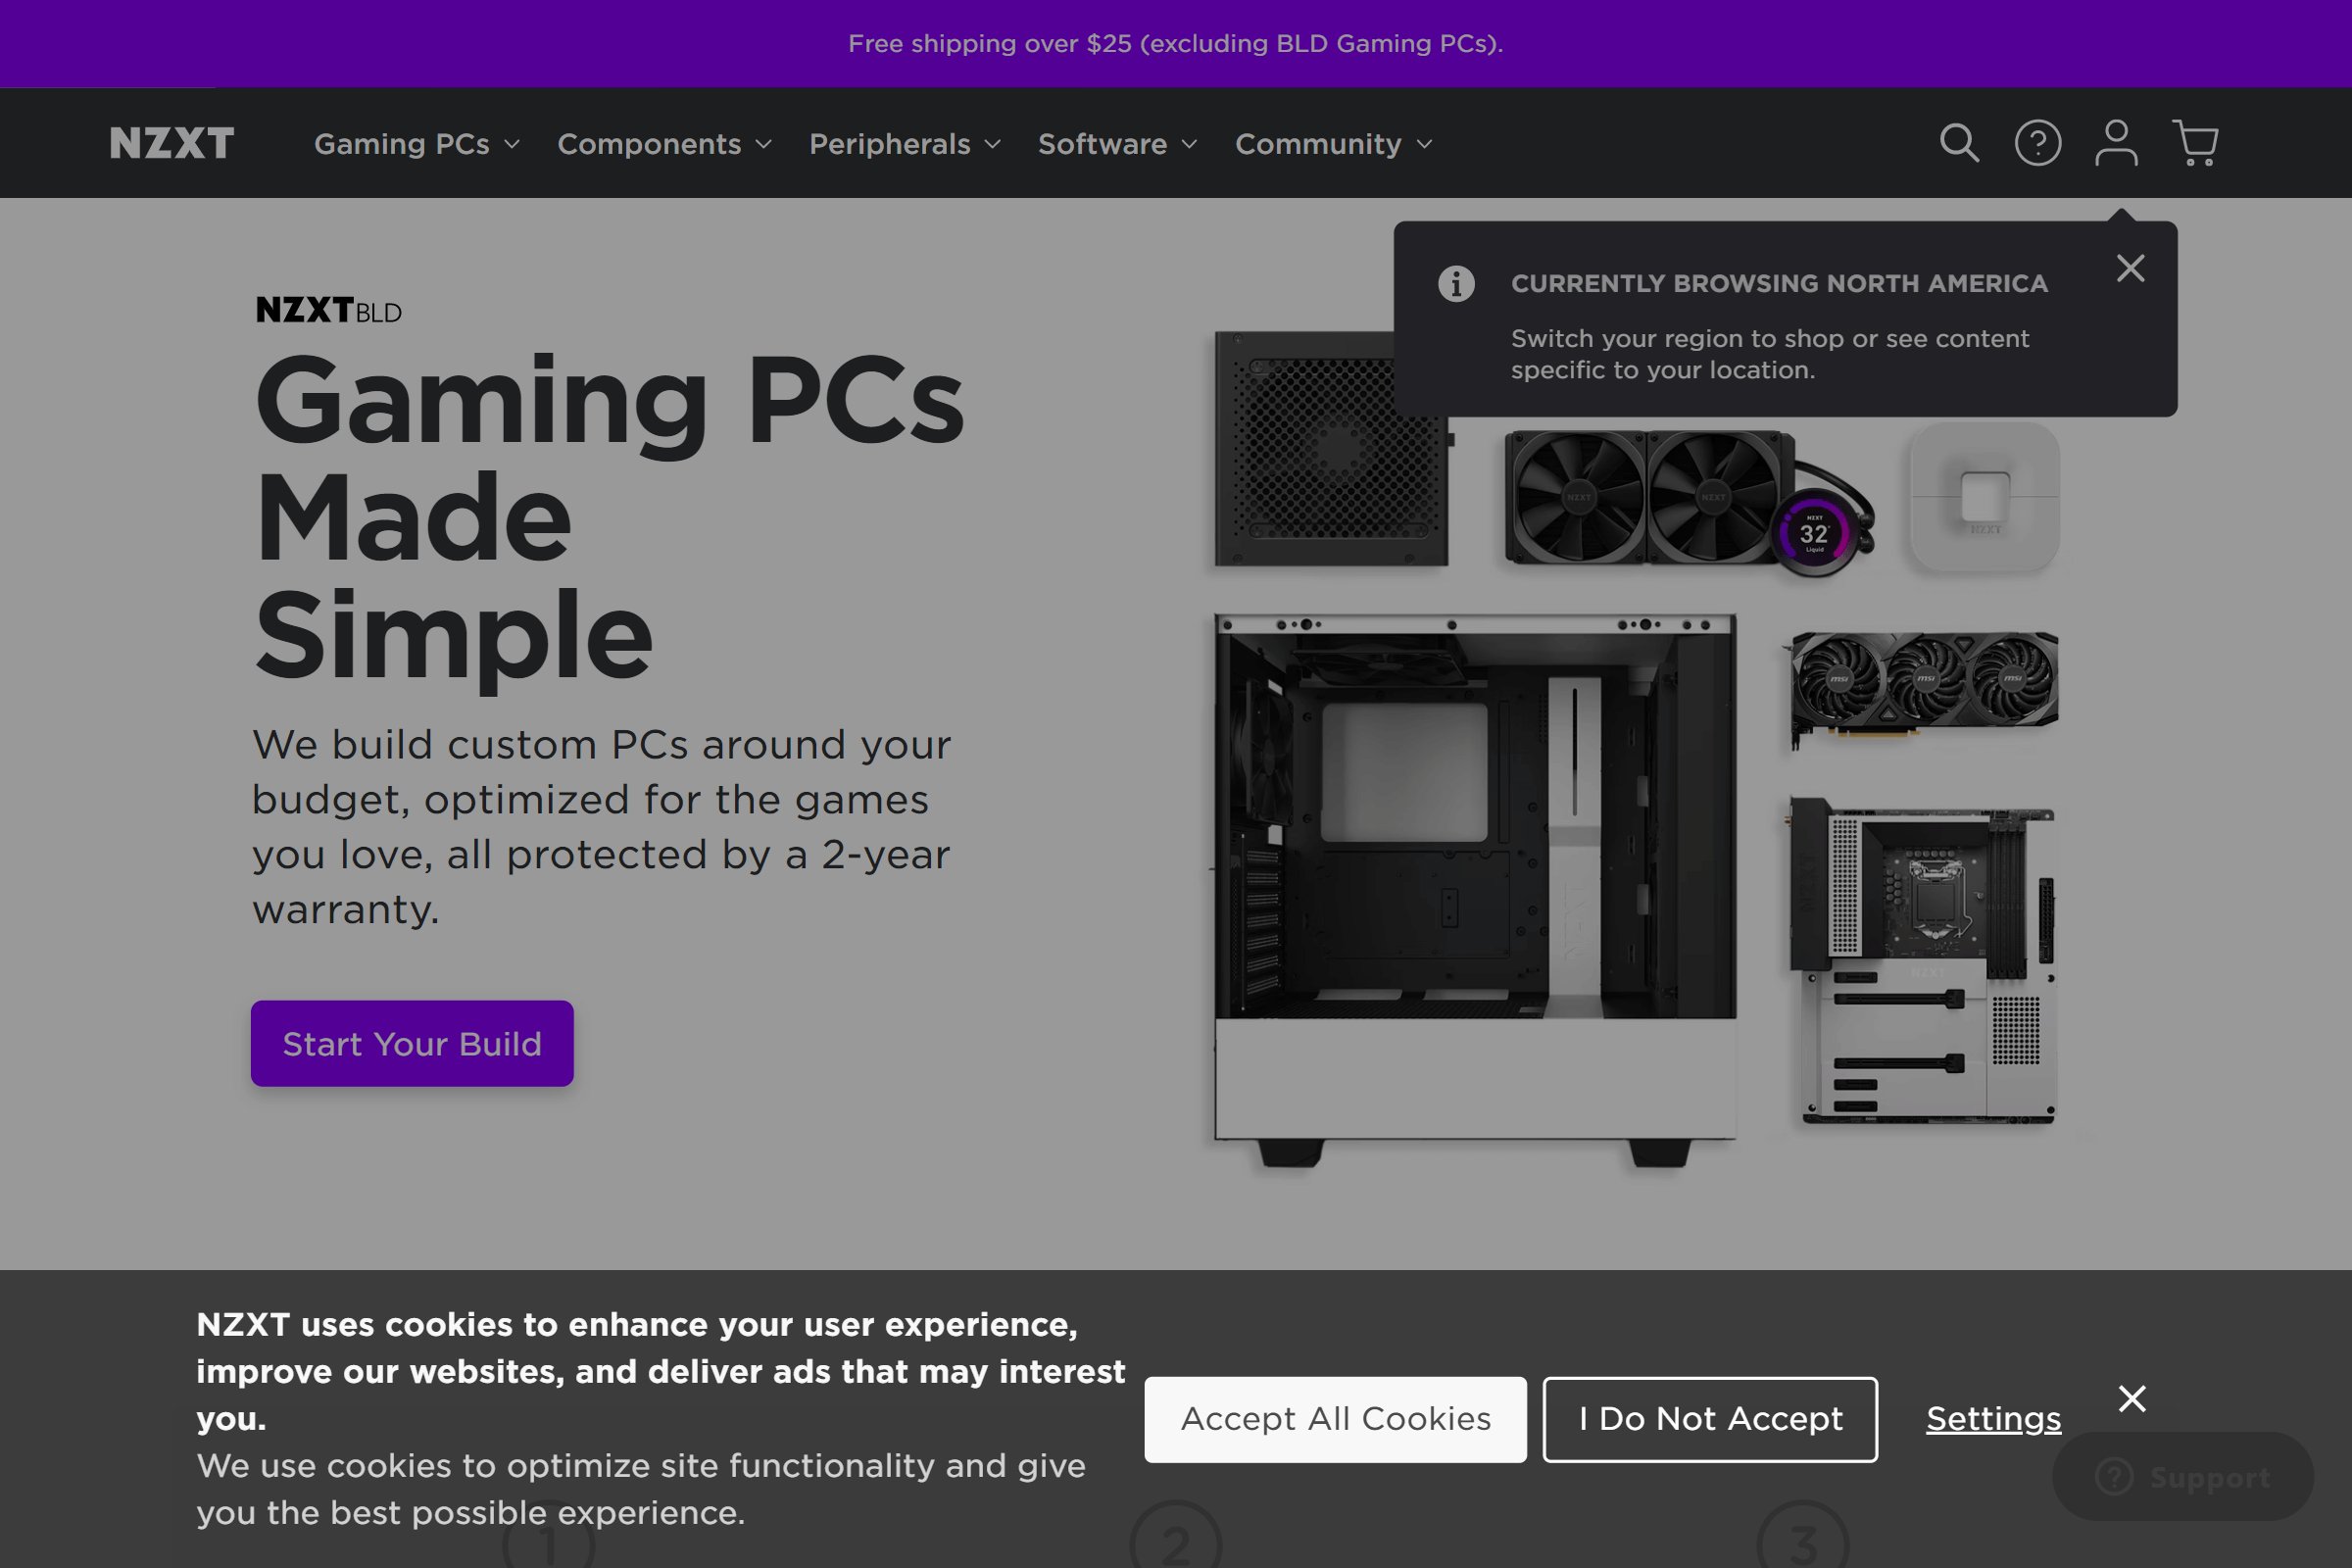 NZXT on ReadSomeReviews